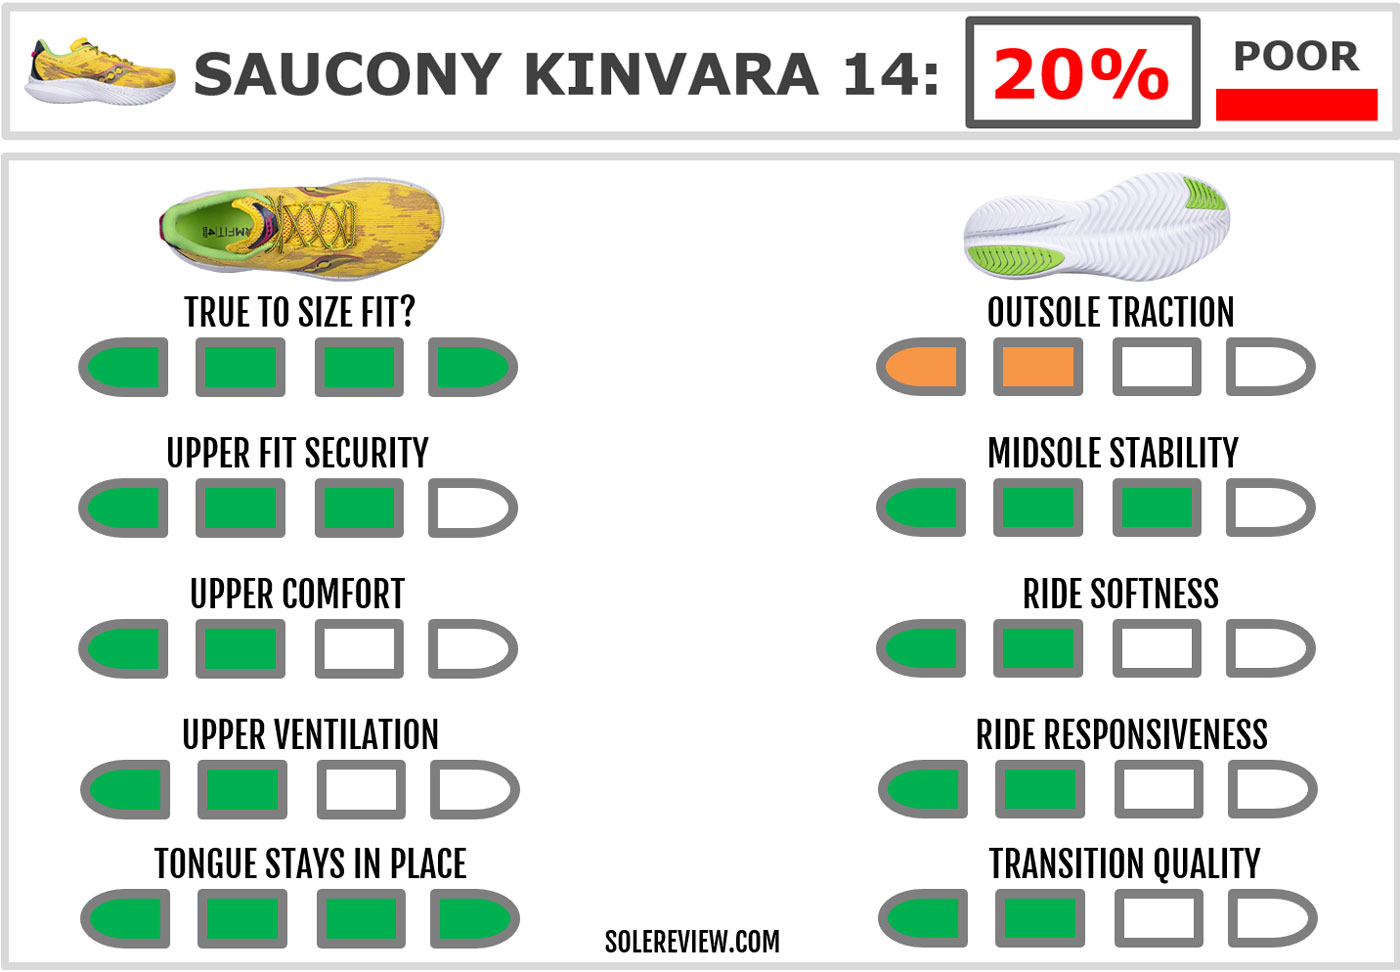 The overall score of the Saucony Kinvara 14.